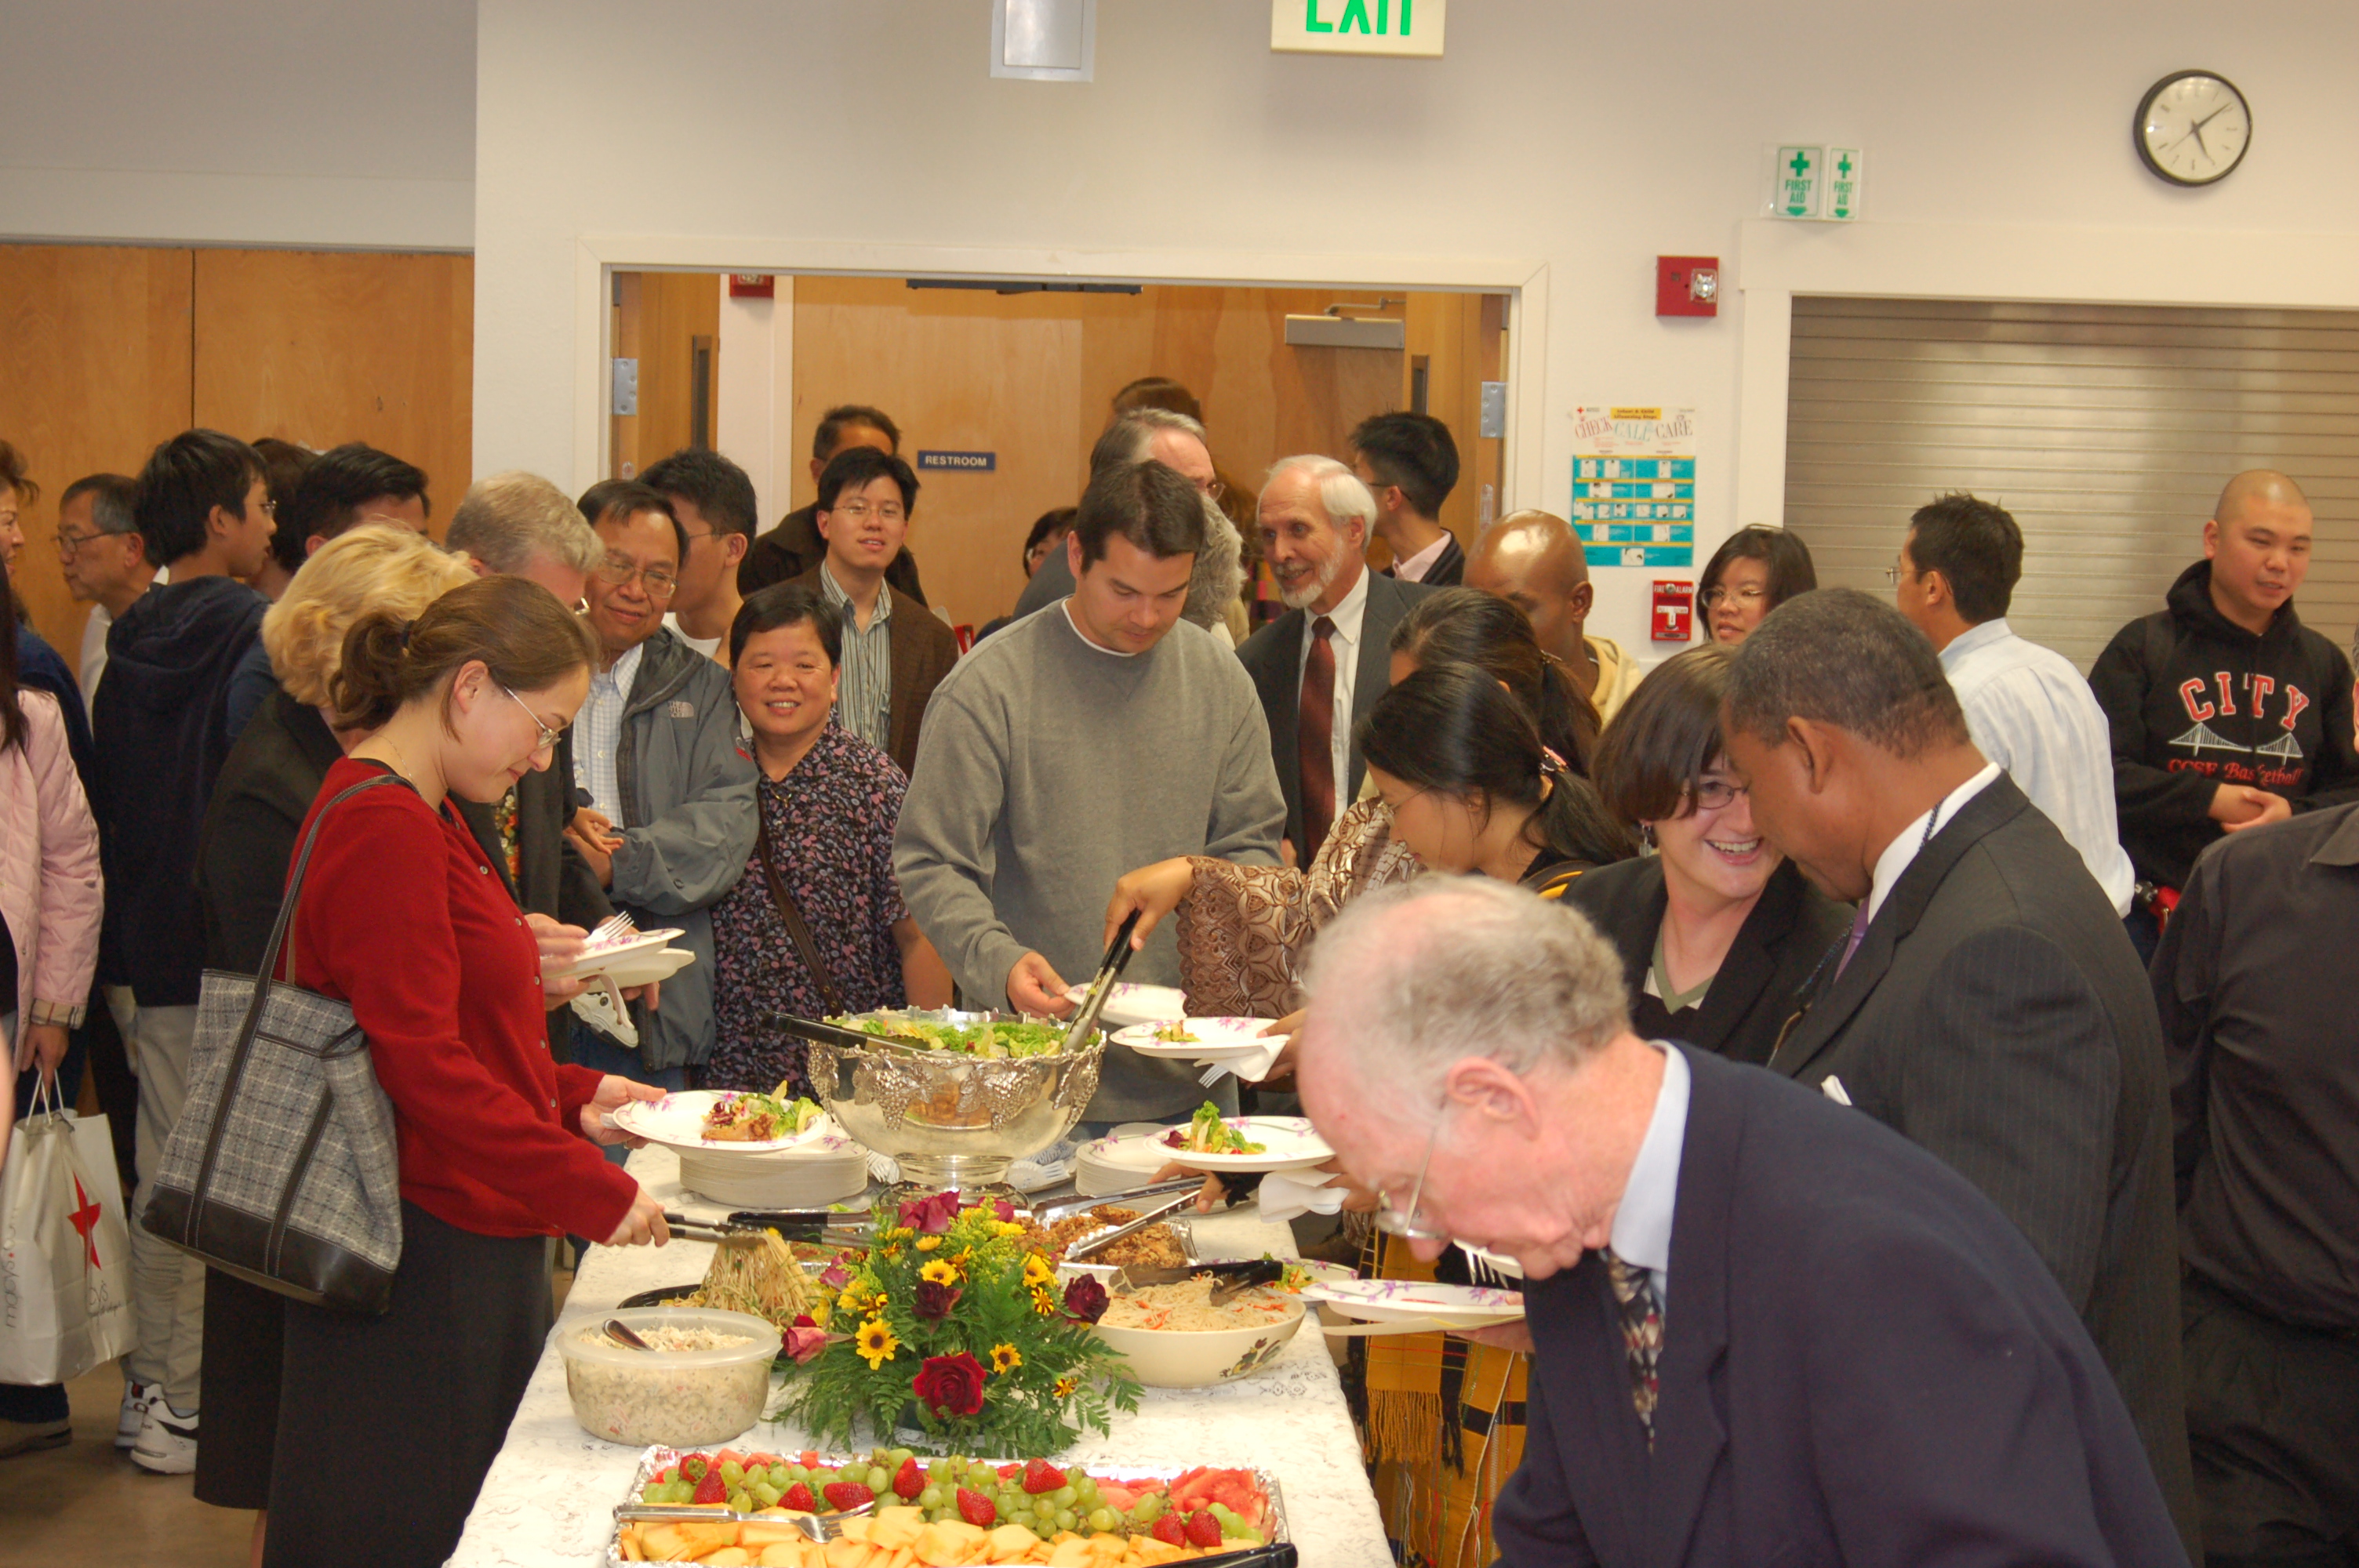 Adventist Church builds database of people not contributing to potluck